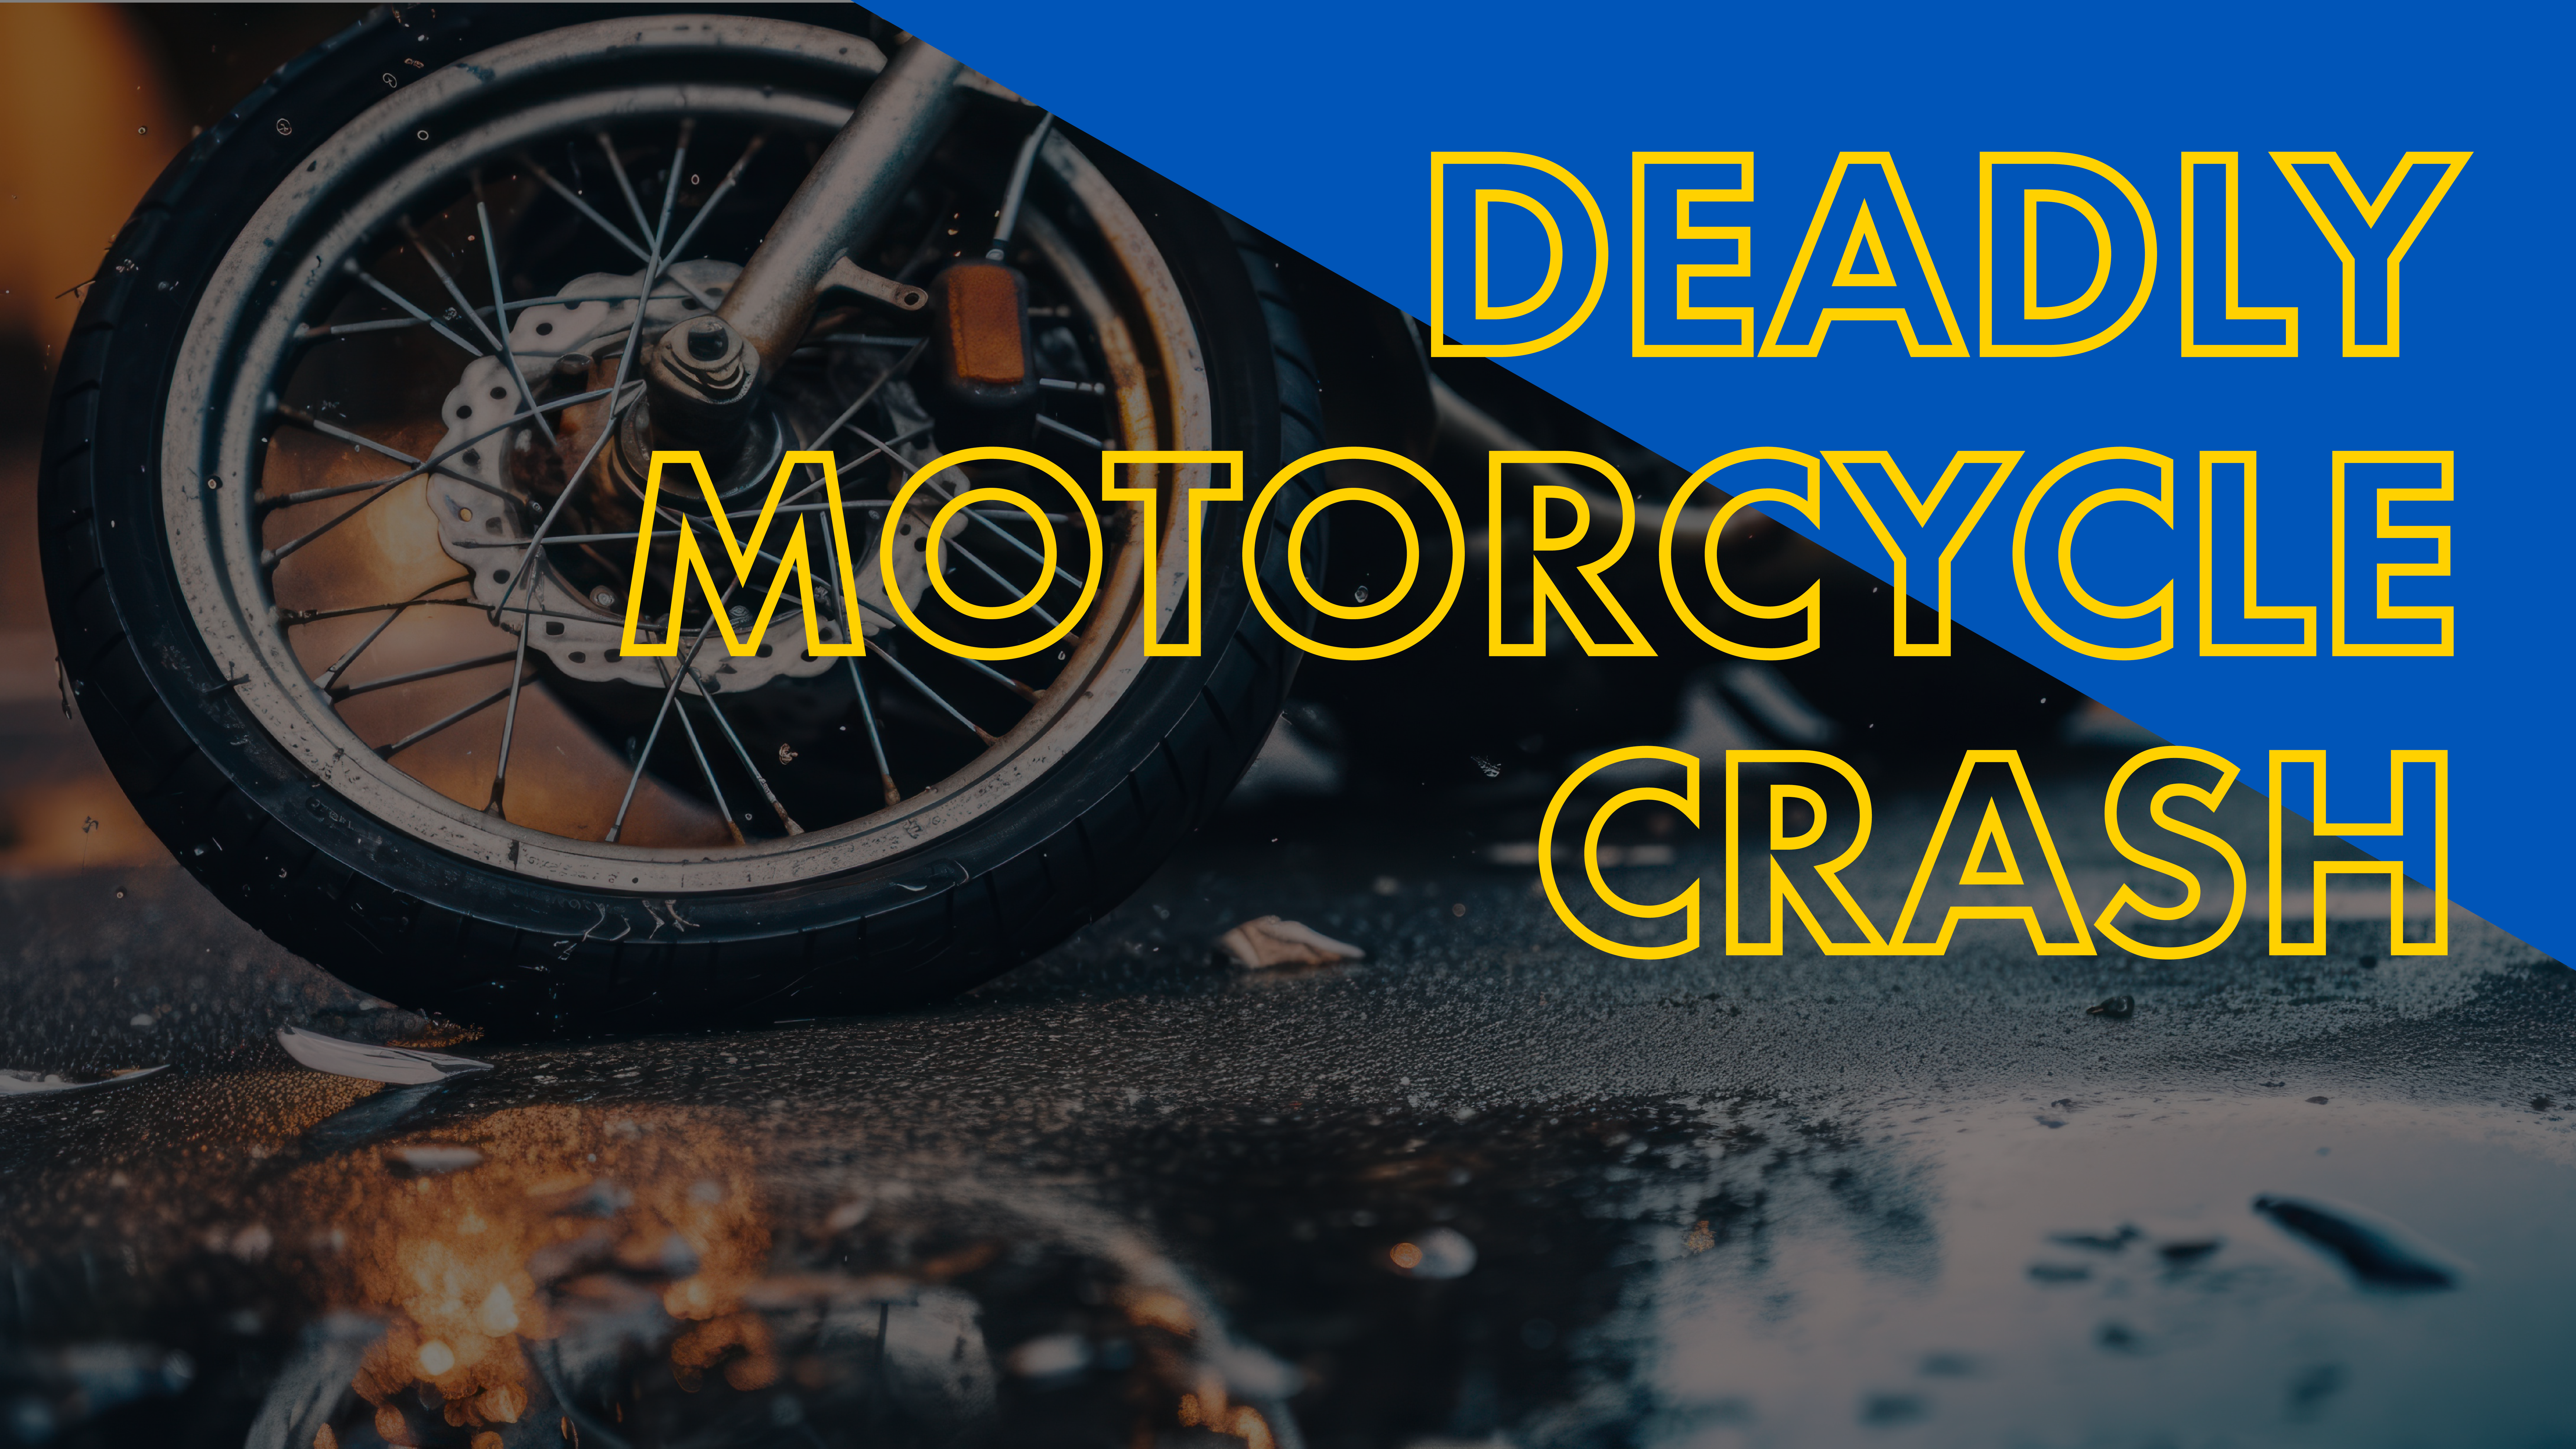 Motorcyclist killed in crash with SUV in Charlevoix Co.